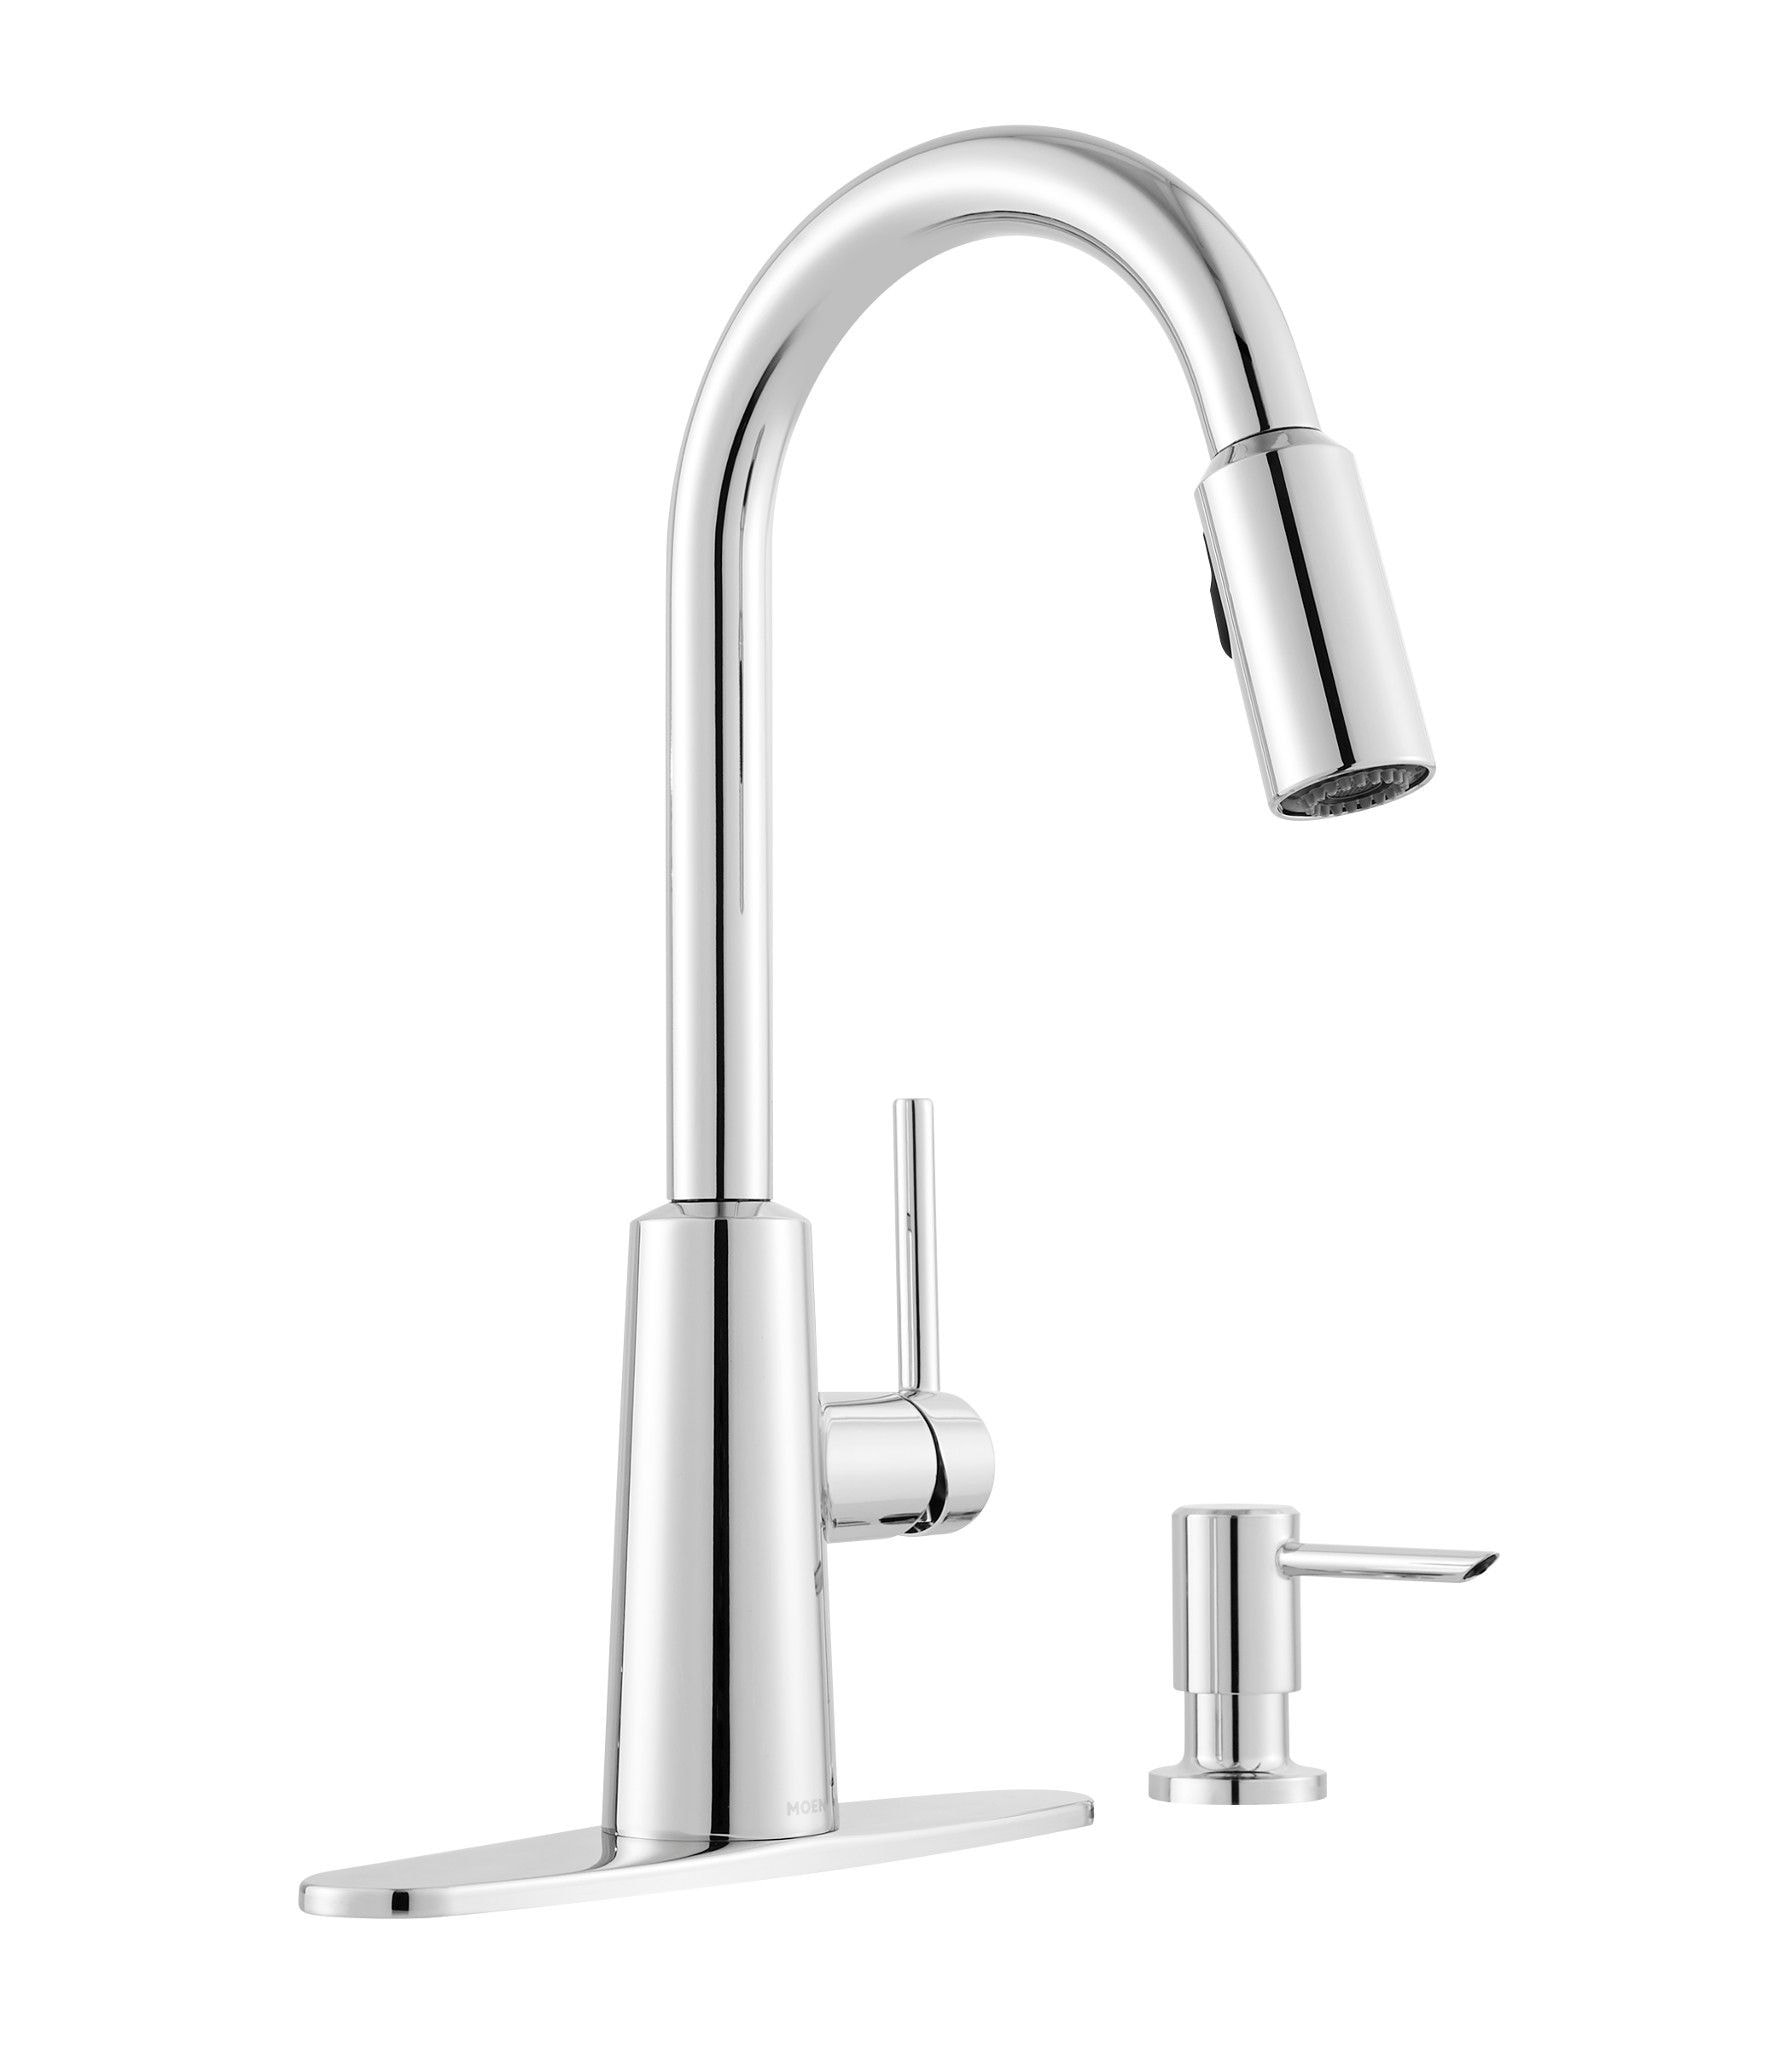 Moen Nori Chrome Single Handle Pull-down Kitchen Faucet with Sprayer ...